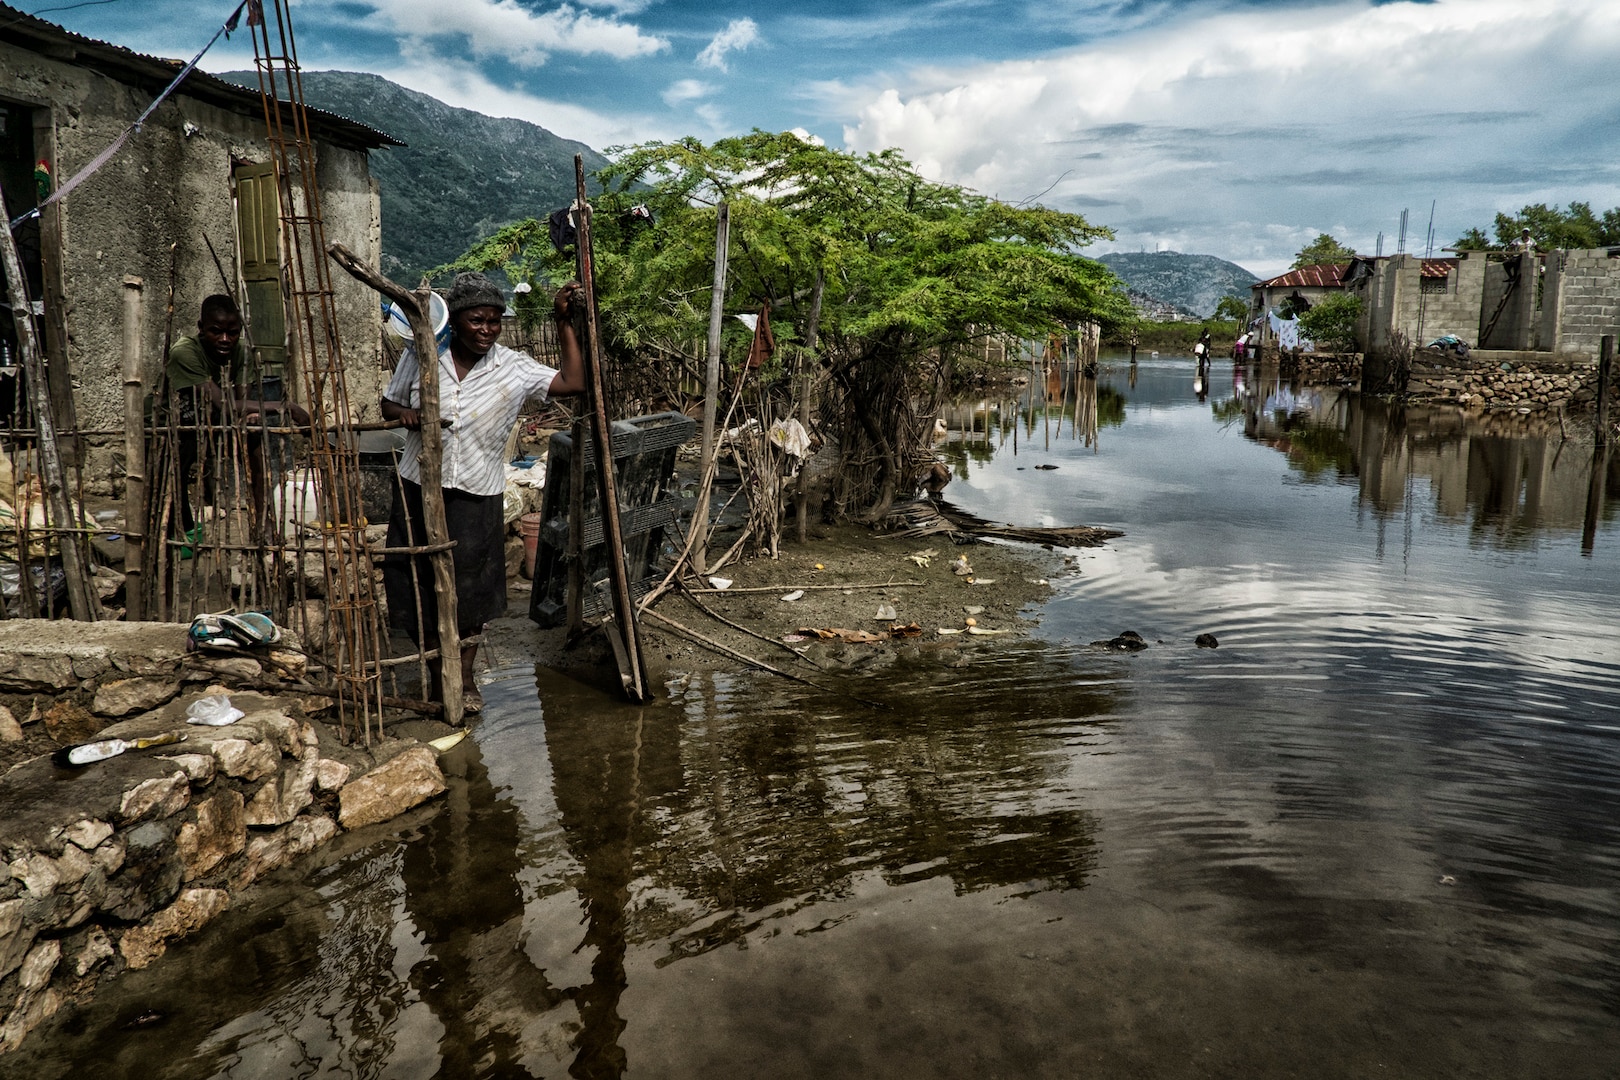 After serious flooding in Haiti’s north, its government, with support of United Nations Mission in Haiti and other UN agencies, responded with evacuations, temporary shelters, and distribution of food and supplies, November 11, 2014 (UN/Logan Abassi)